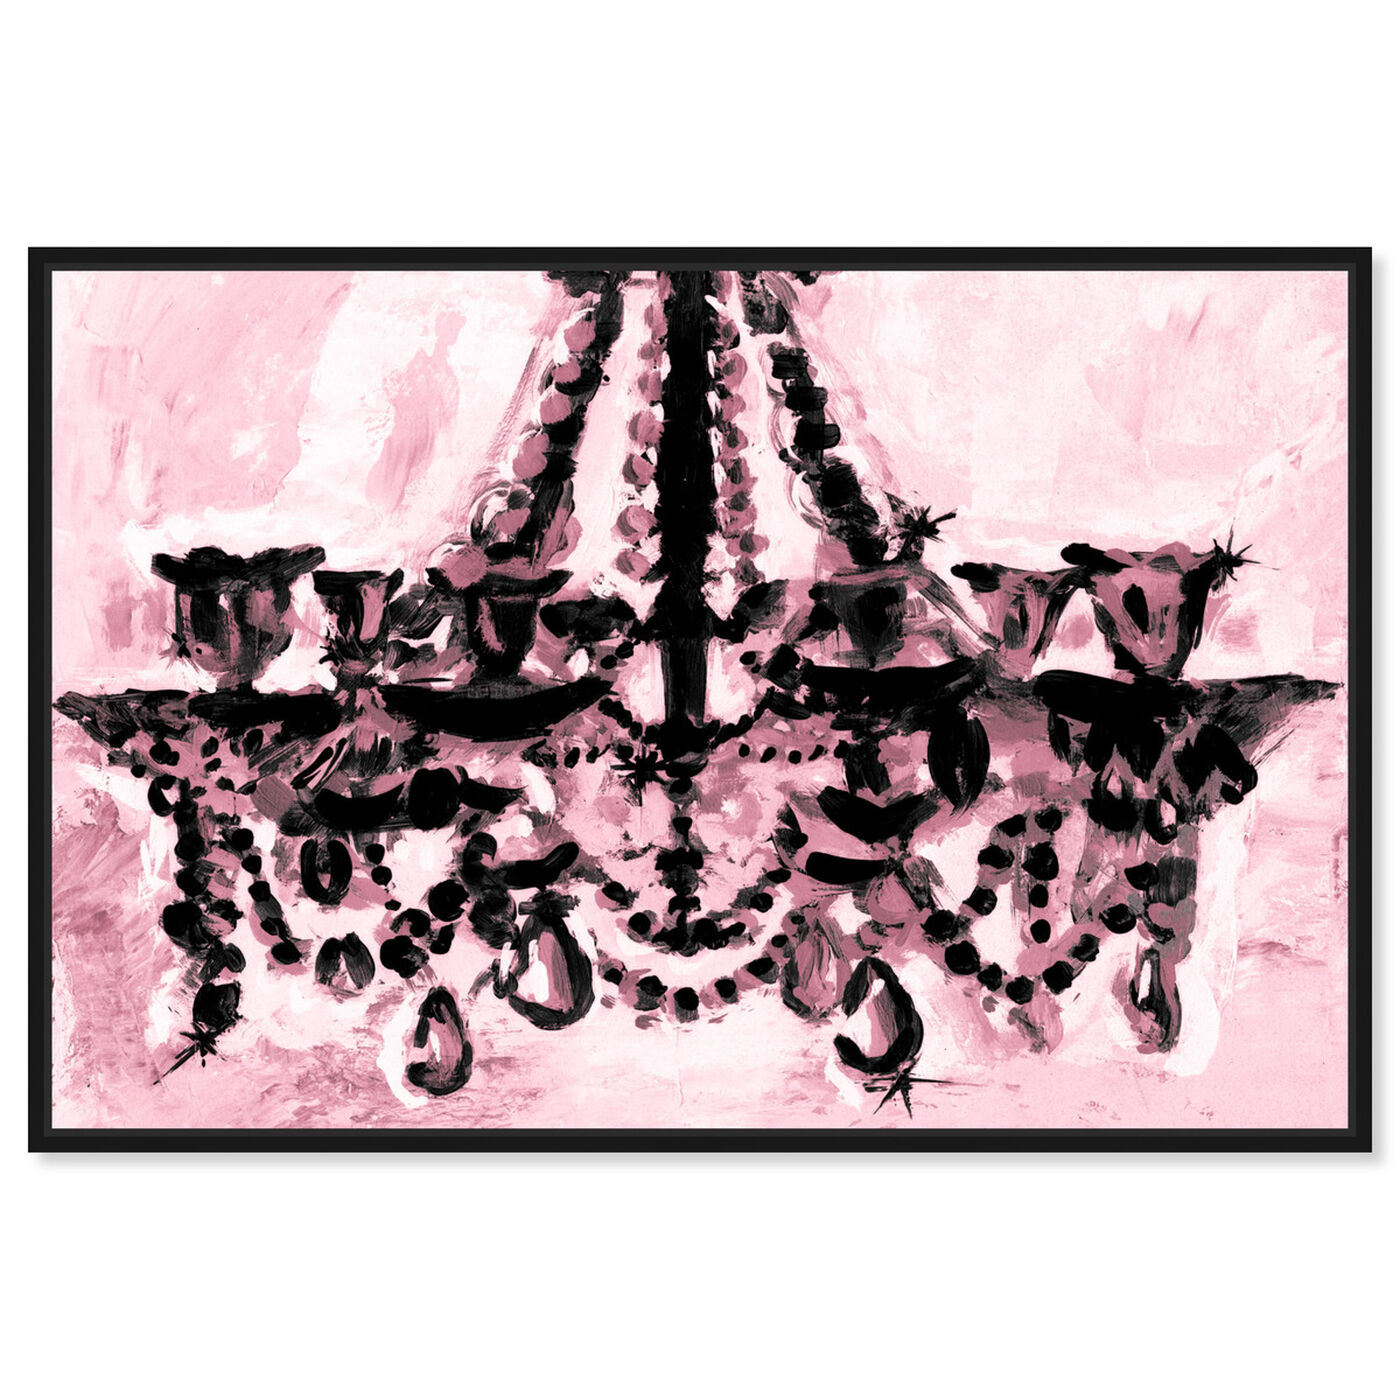 Front view of Rosa y Negro featuring fashion and glam and chandeliers art.